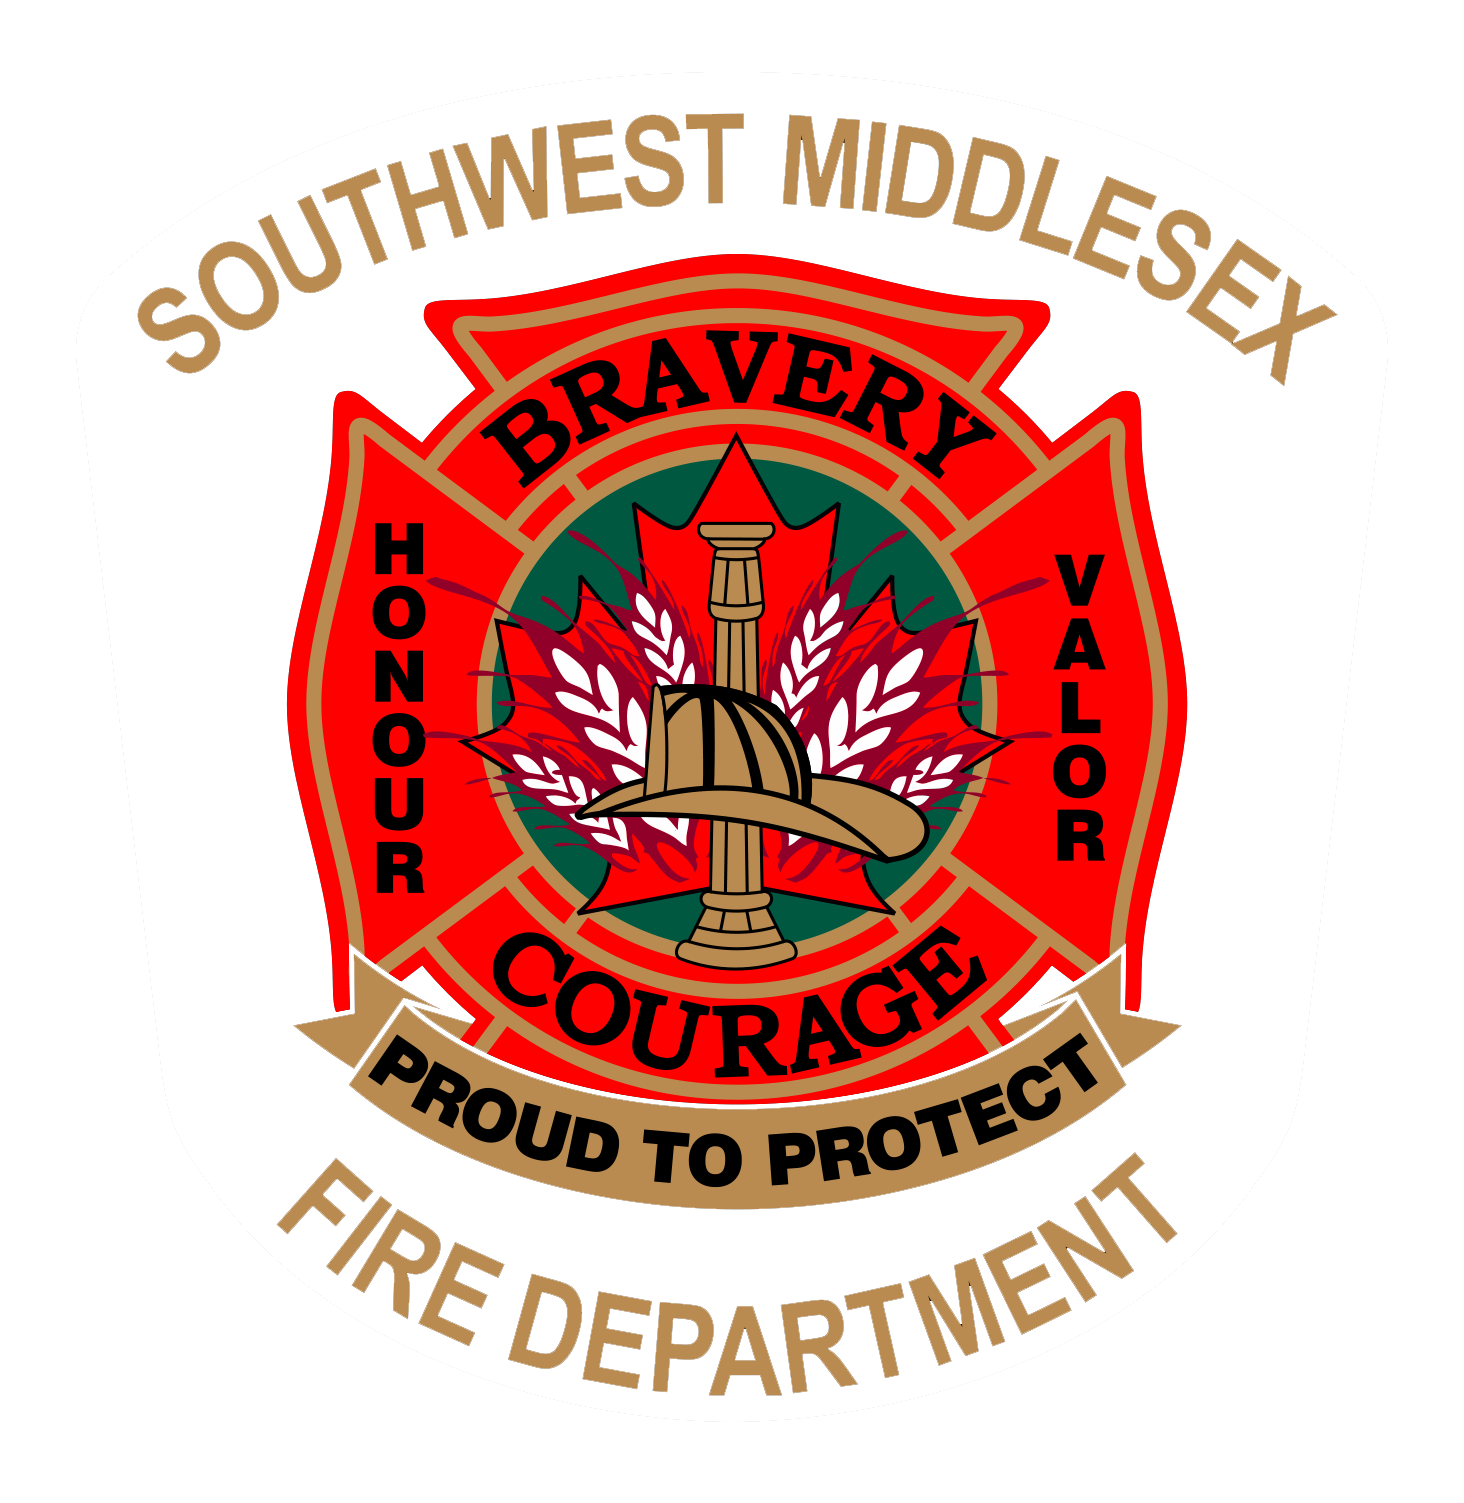 Southwest Middlesex Fire Department